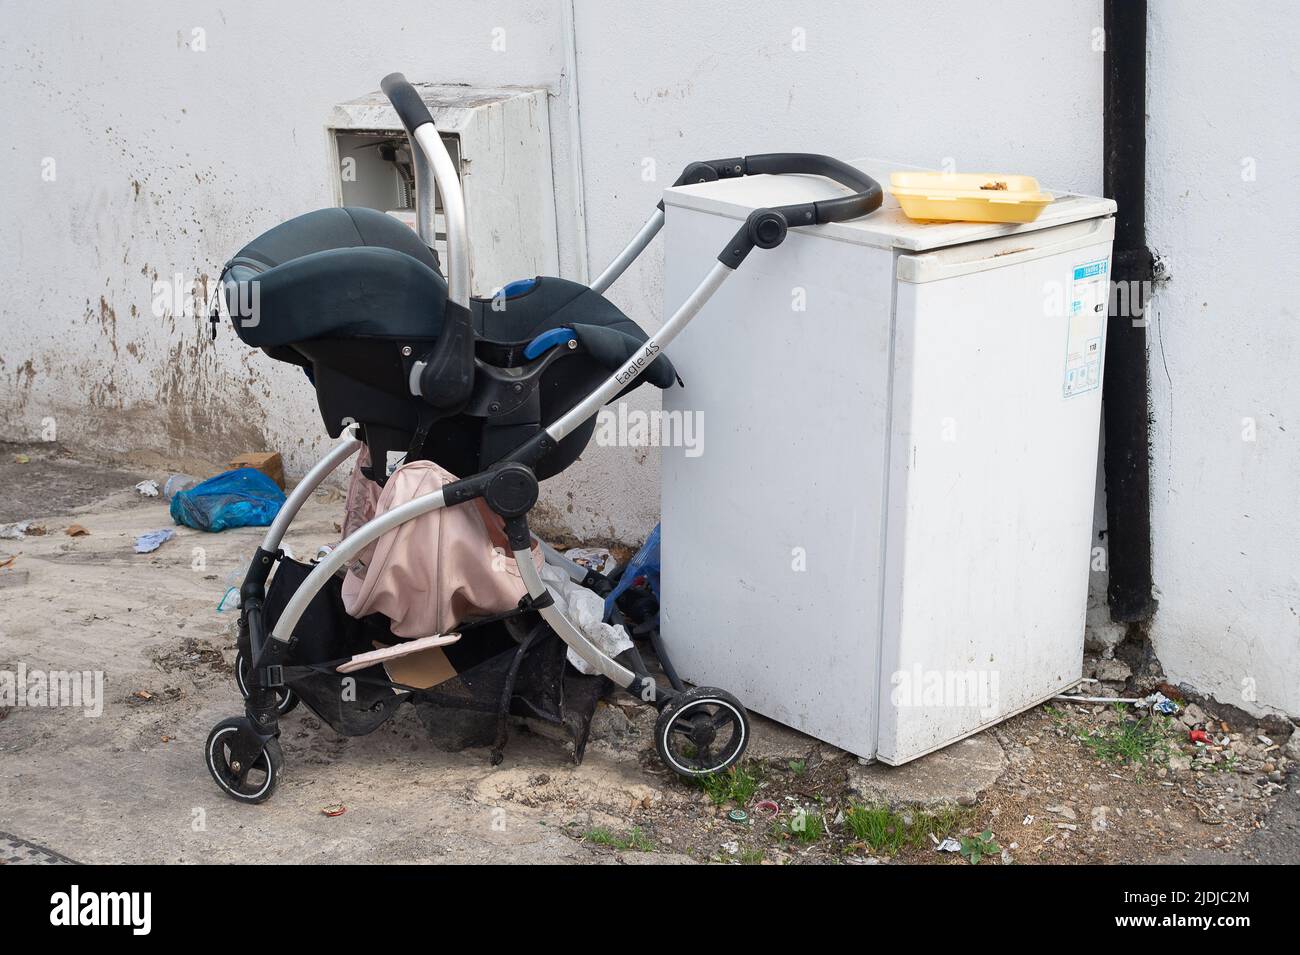 Slough, Berkshire, UK. 21st June, 2022. A child's pushchair and a fridge dumped on a street in Slough. Illegal fly tipping can result in fines of up £50,000 or 12 months imprisonment for those convicted of fly tipping. Slough has a big tip in Chalvey that is free to use for residents disposing of household waste. Credit: Maureen McLean/Alamy Stock Photo